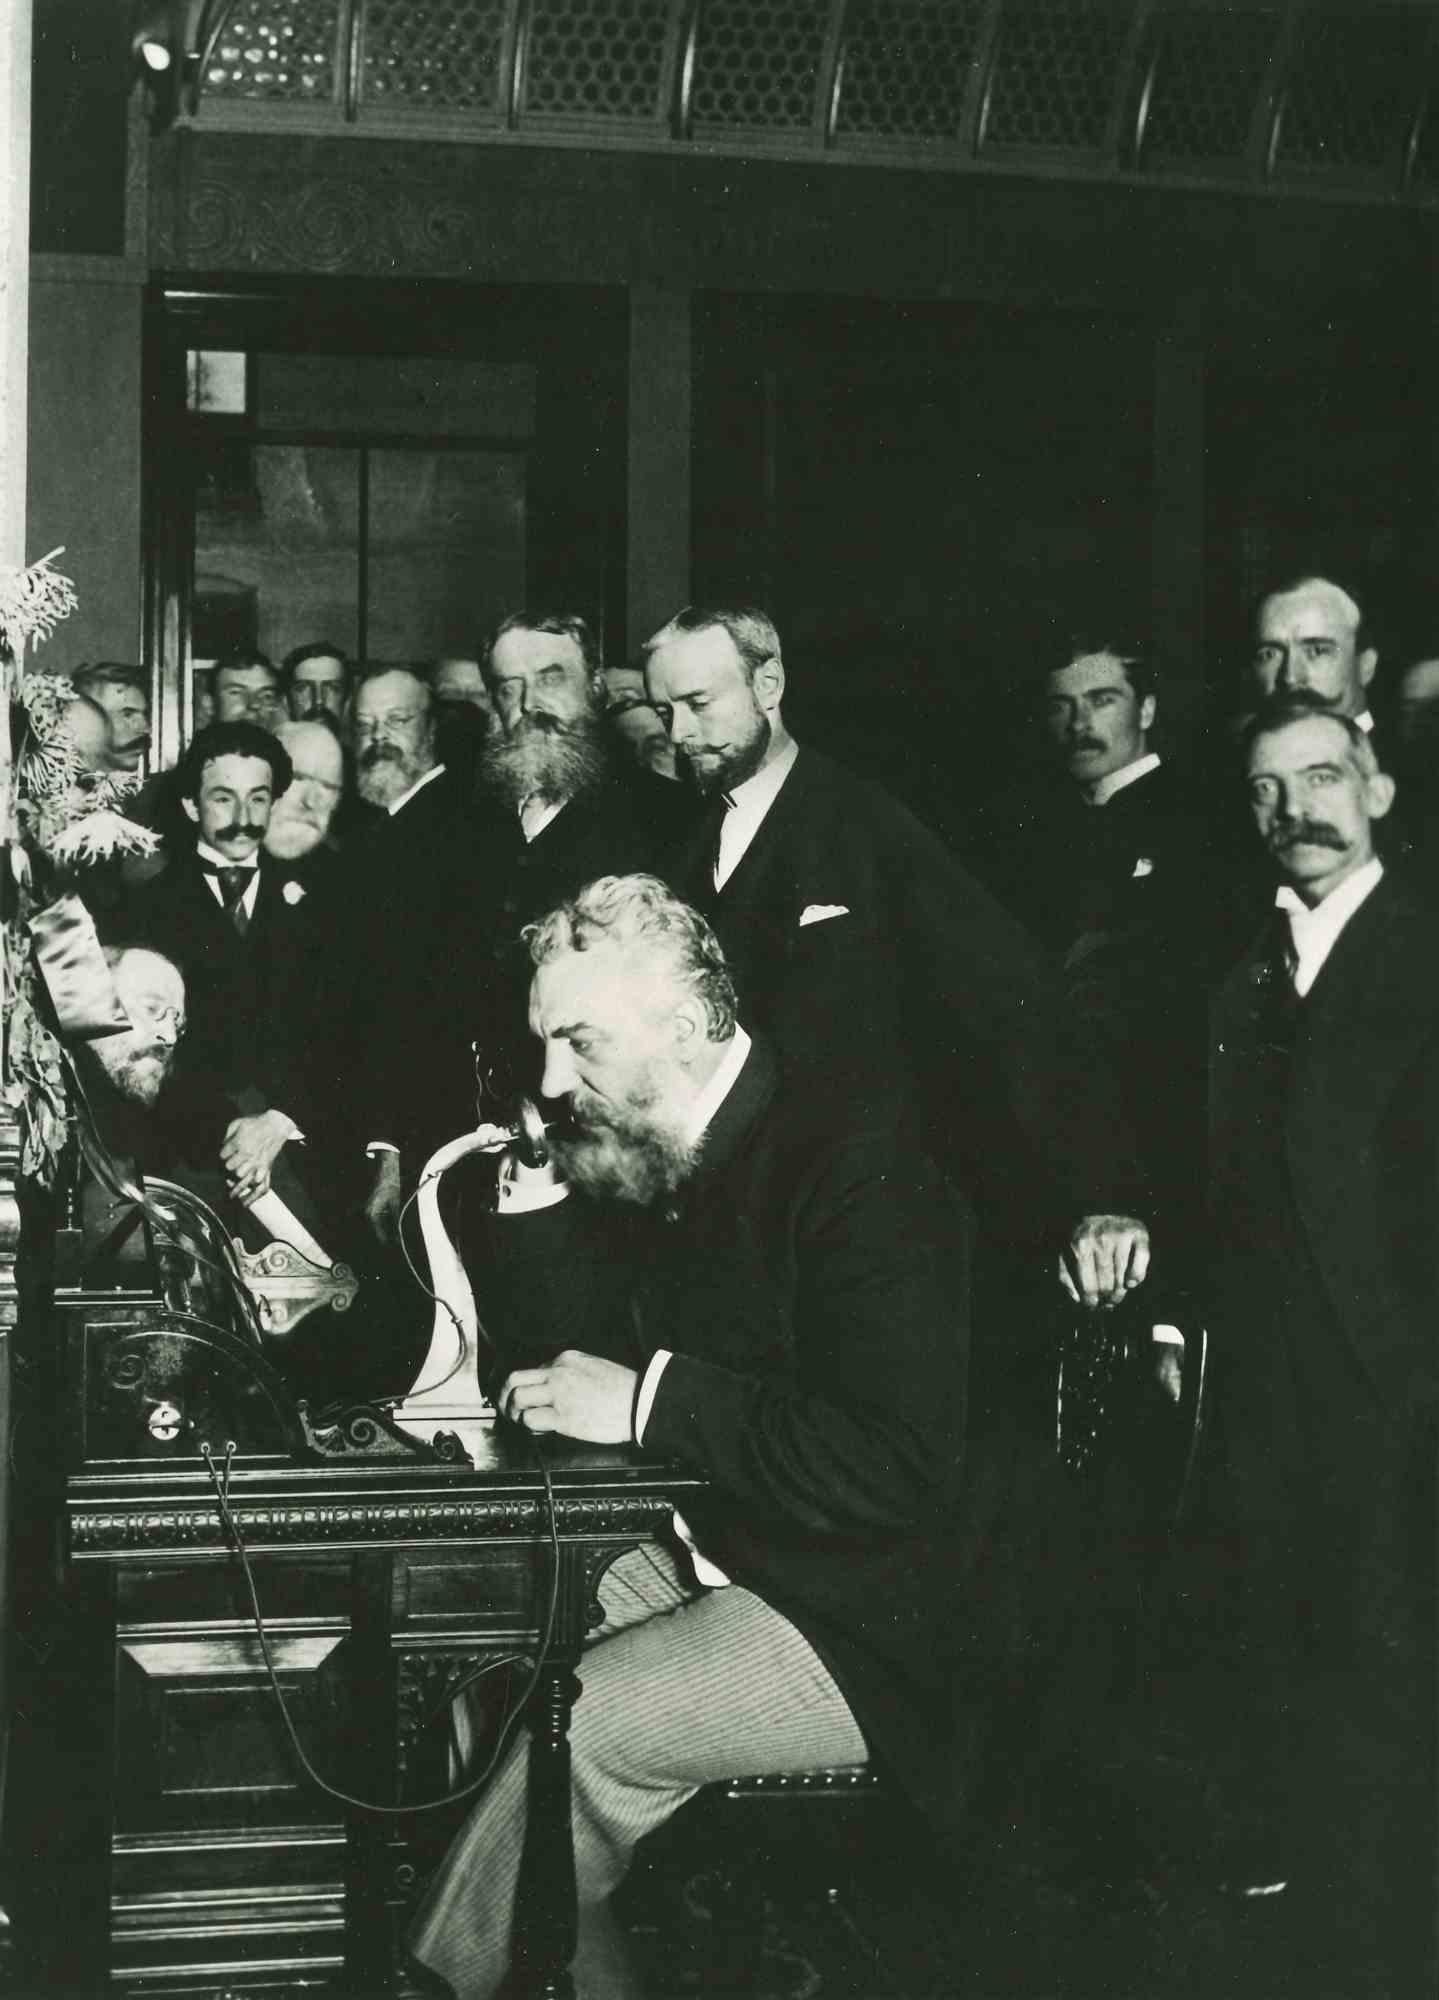 Unknown Figurative Photograph - Alexander Graham Bell  - Vintage Photograph - Mid 20th Century